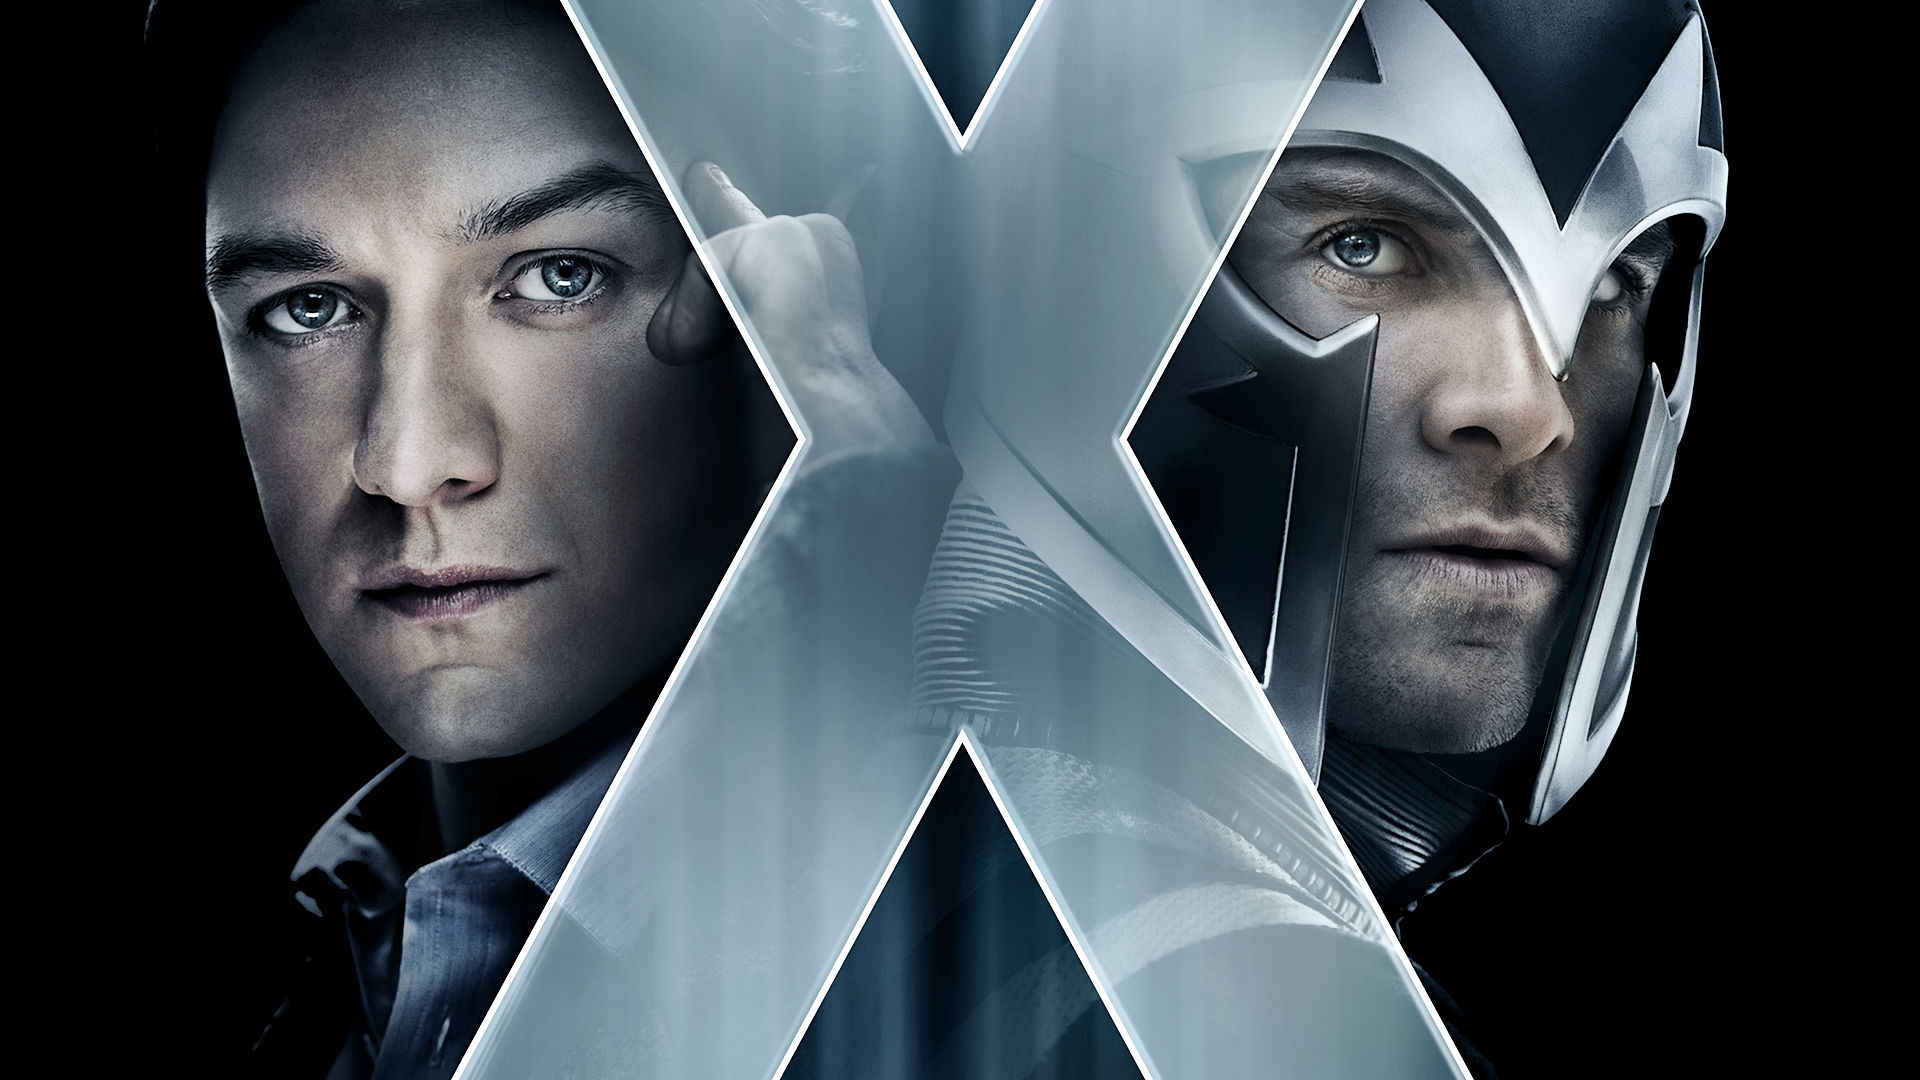 Professor x and magneto in x men apocalypse hd movies k wallpapers images backgrounds photos and pictures